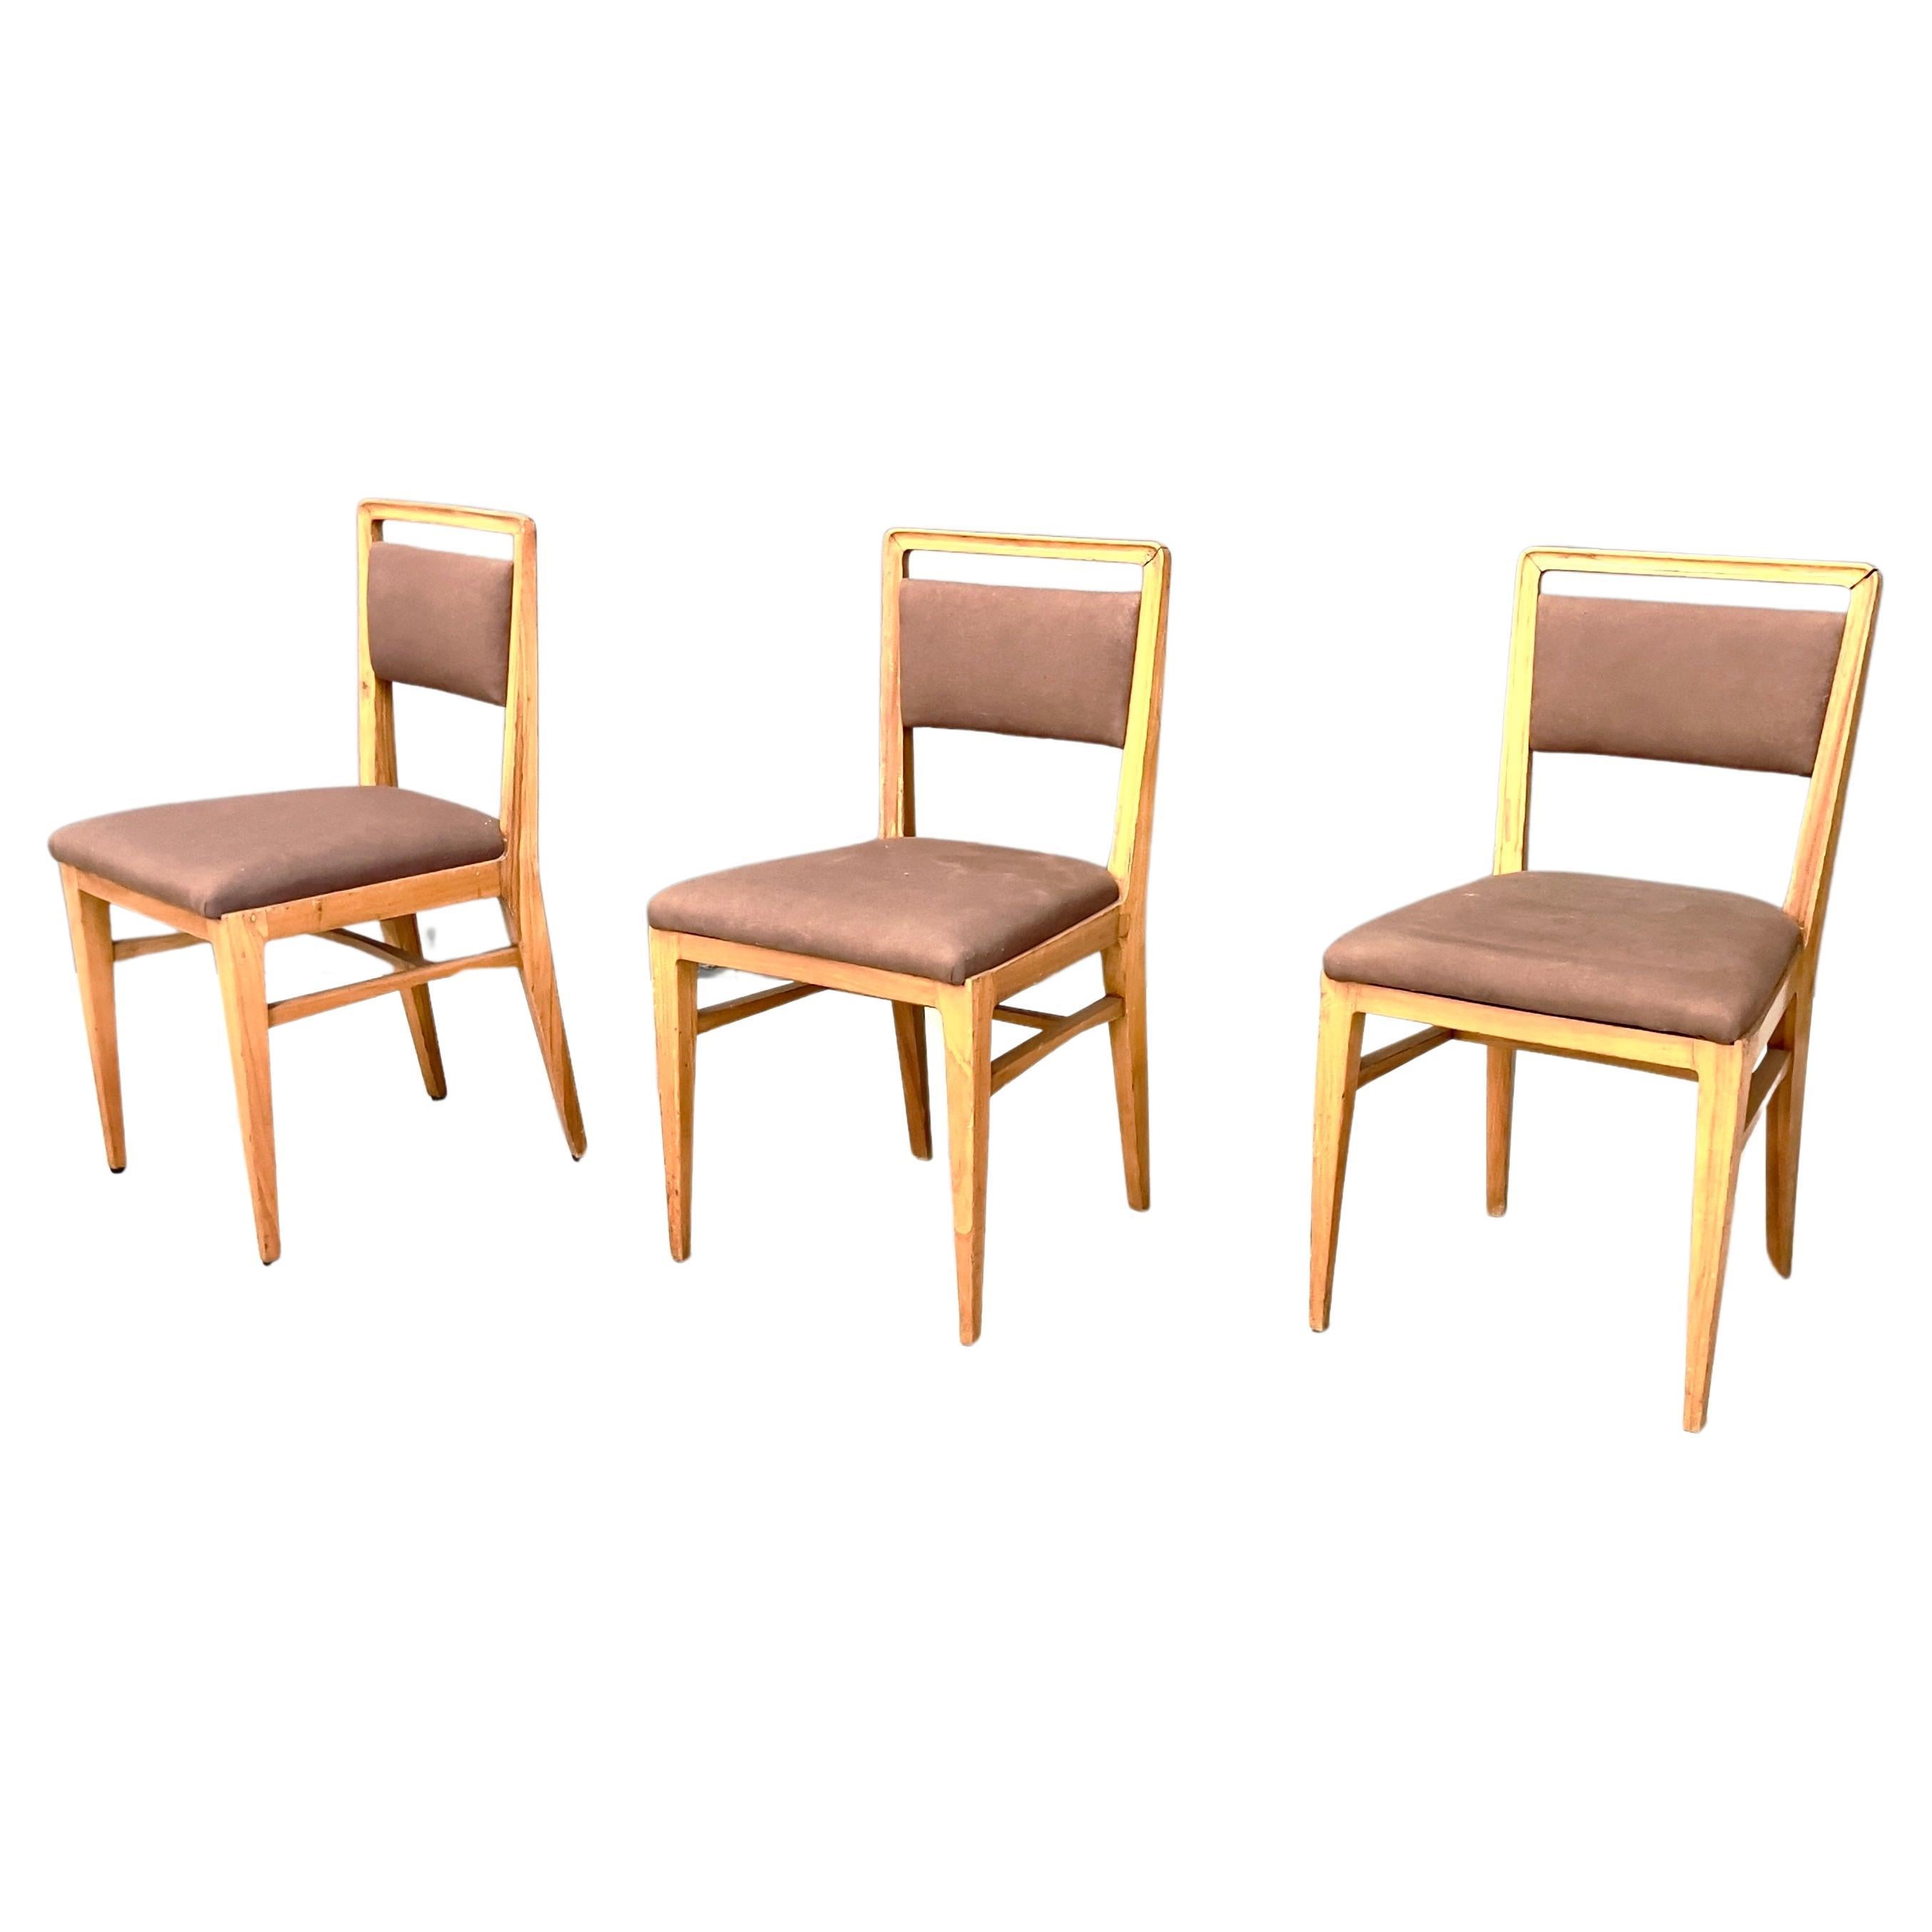 Three Chairs Attributed to Gio Ponti, 1950s For Sale